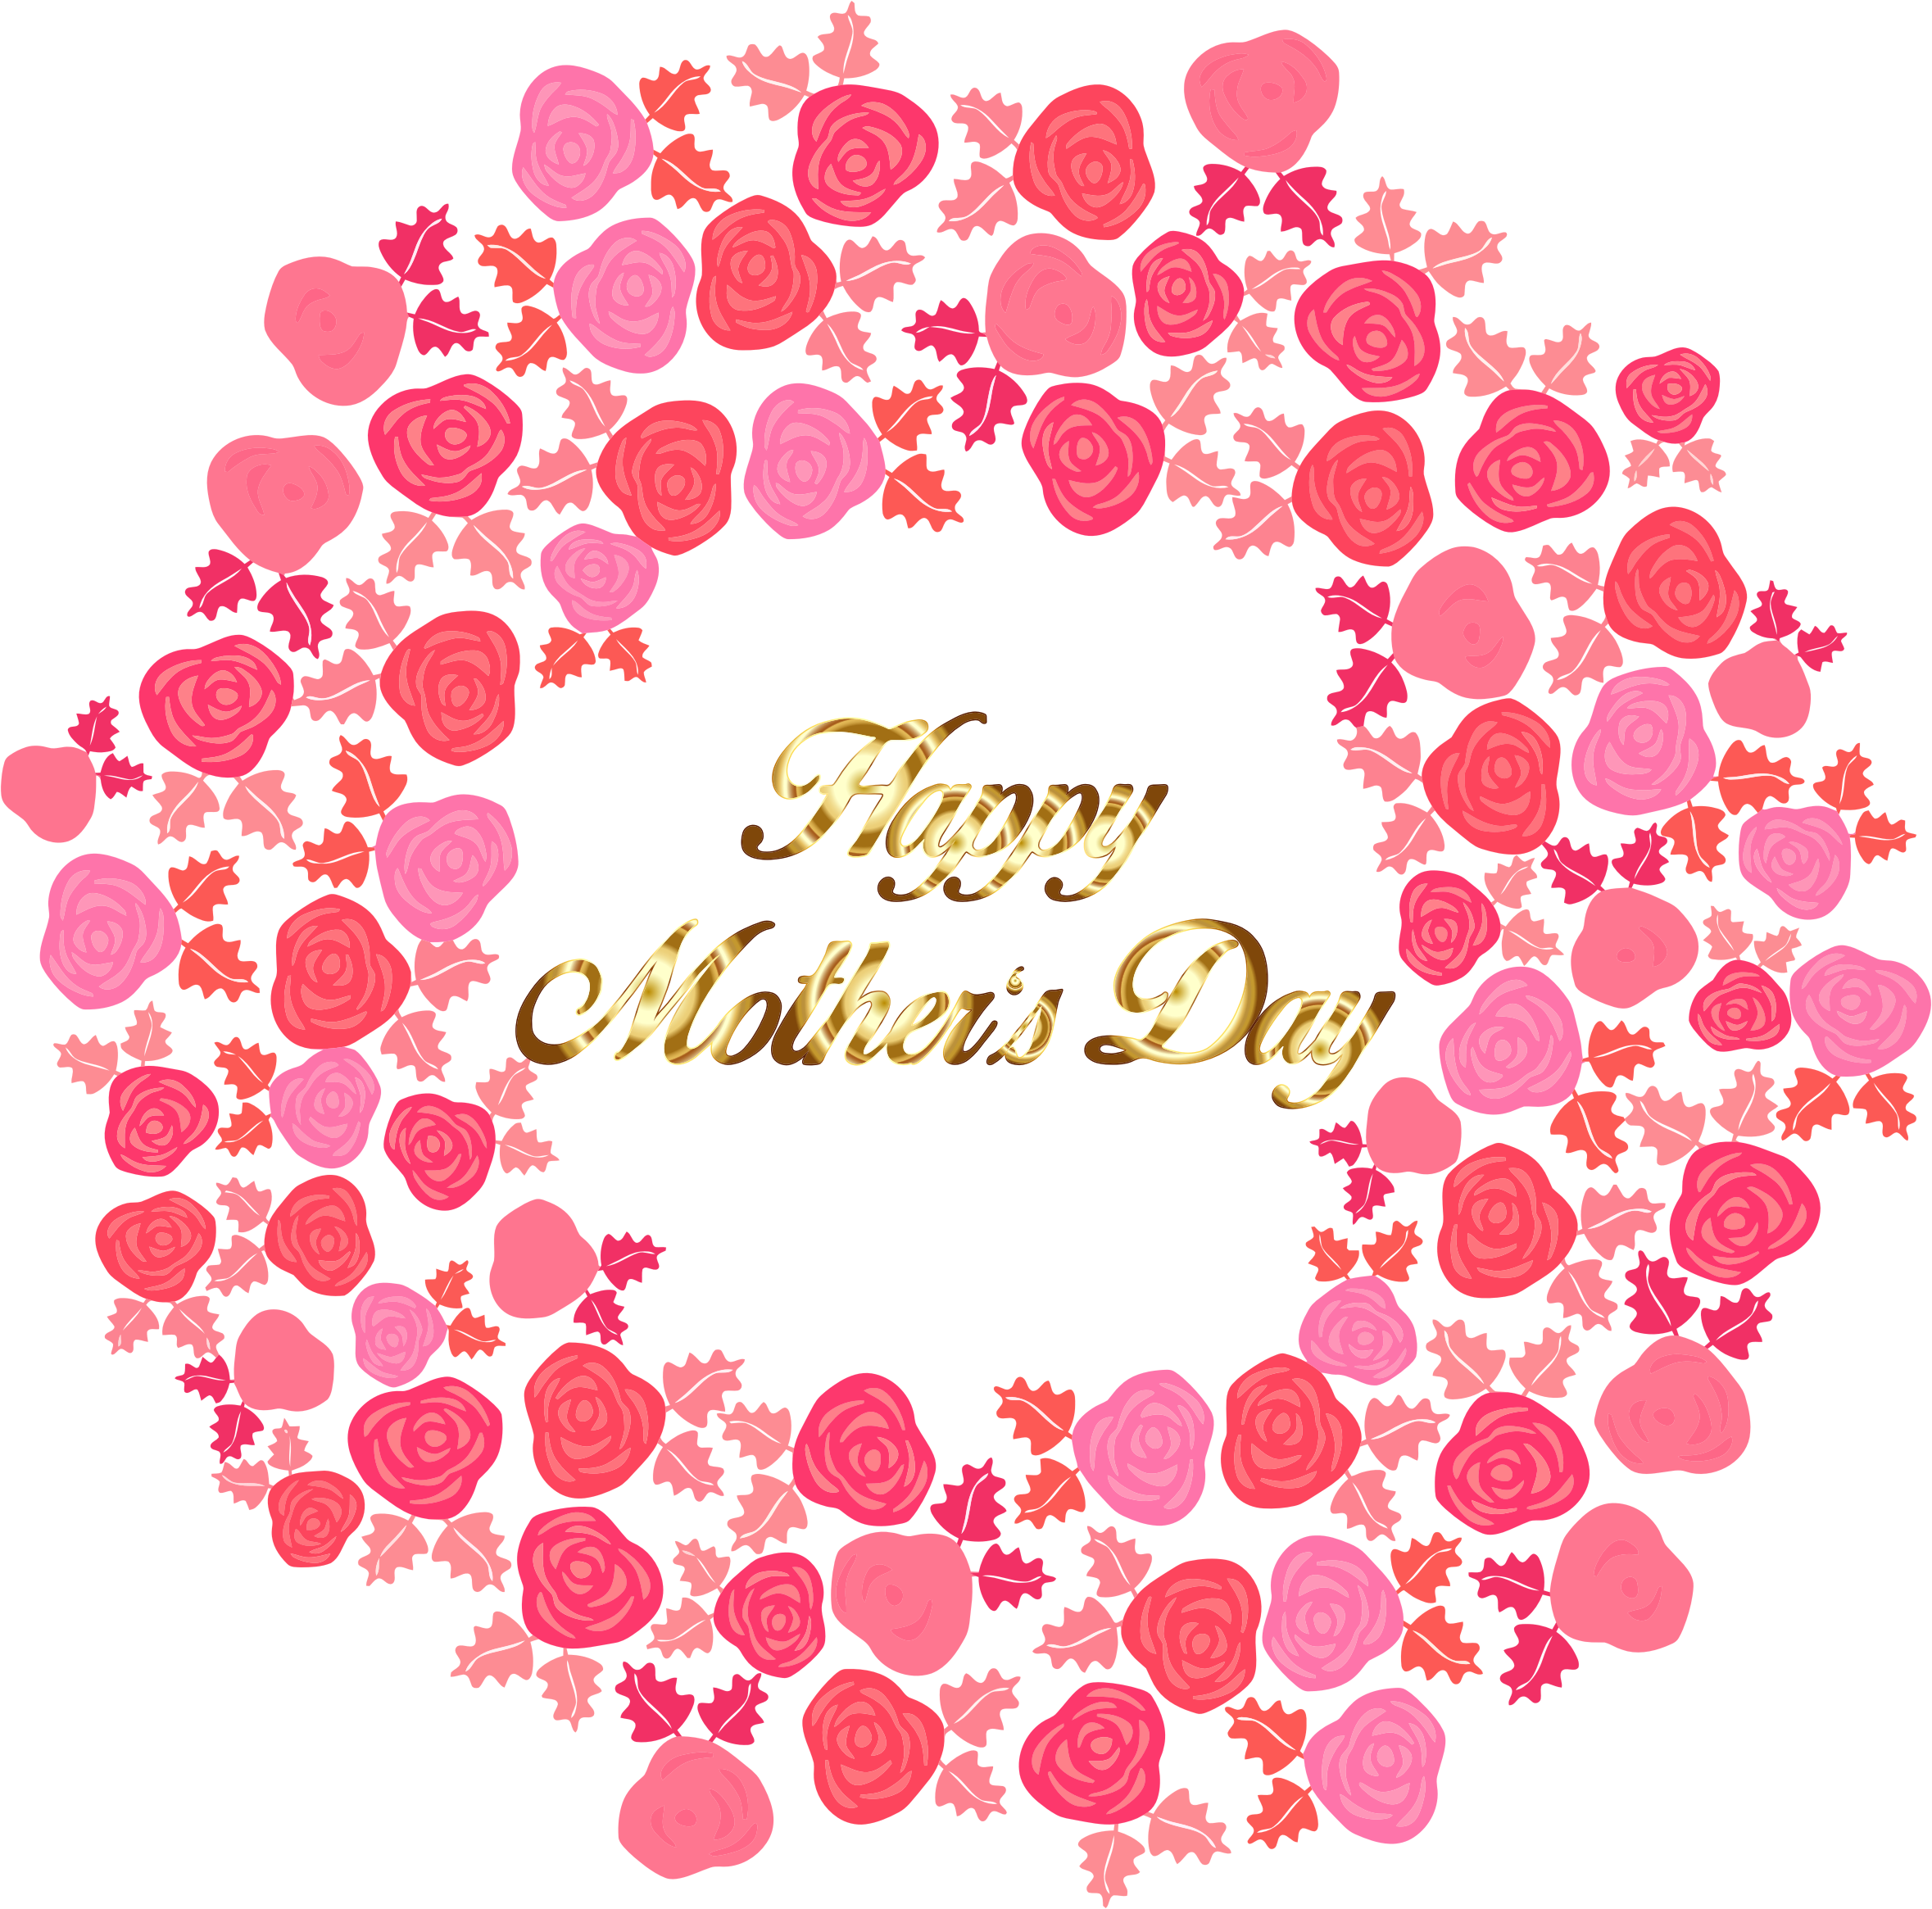 This Free Icons Png Design Of Happy Mothers Day Bouquet - Mother's Day Messages To Daughters (2358x2330)